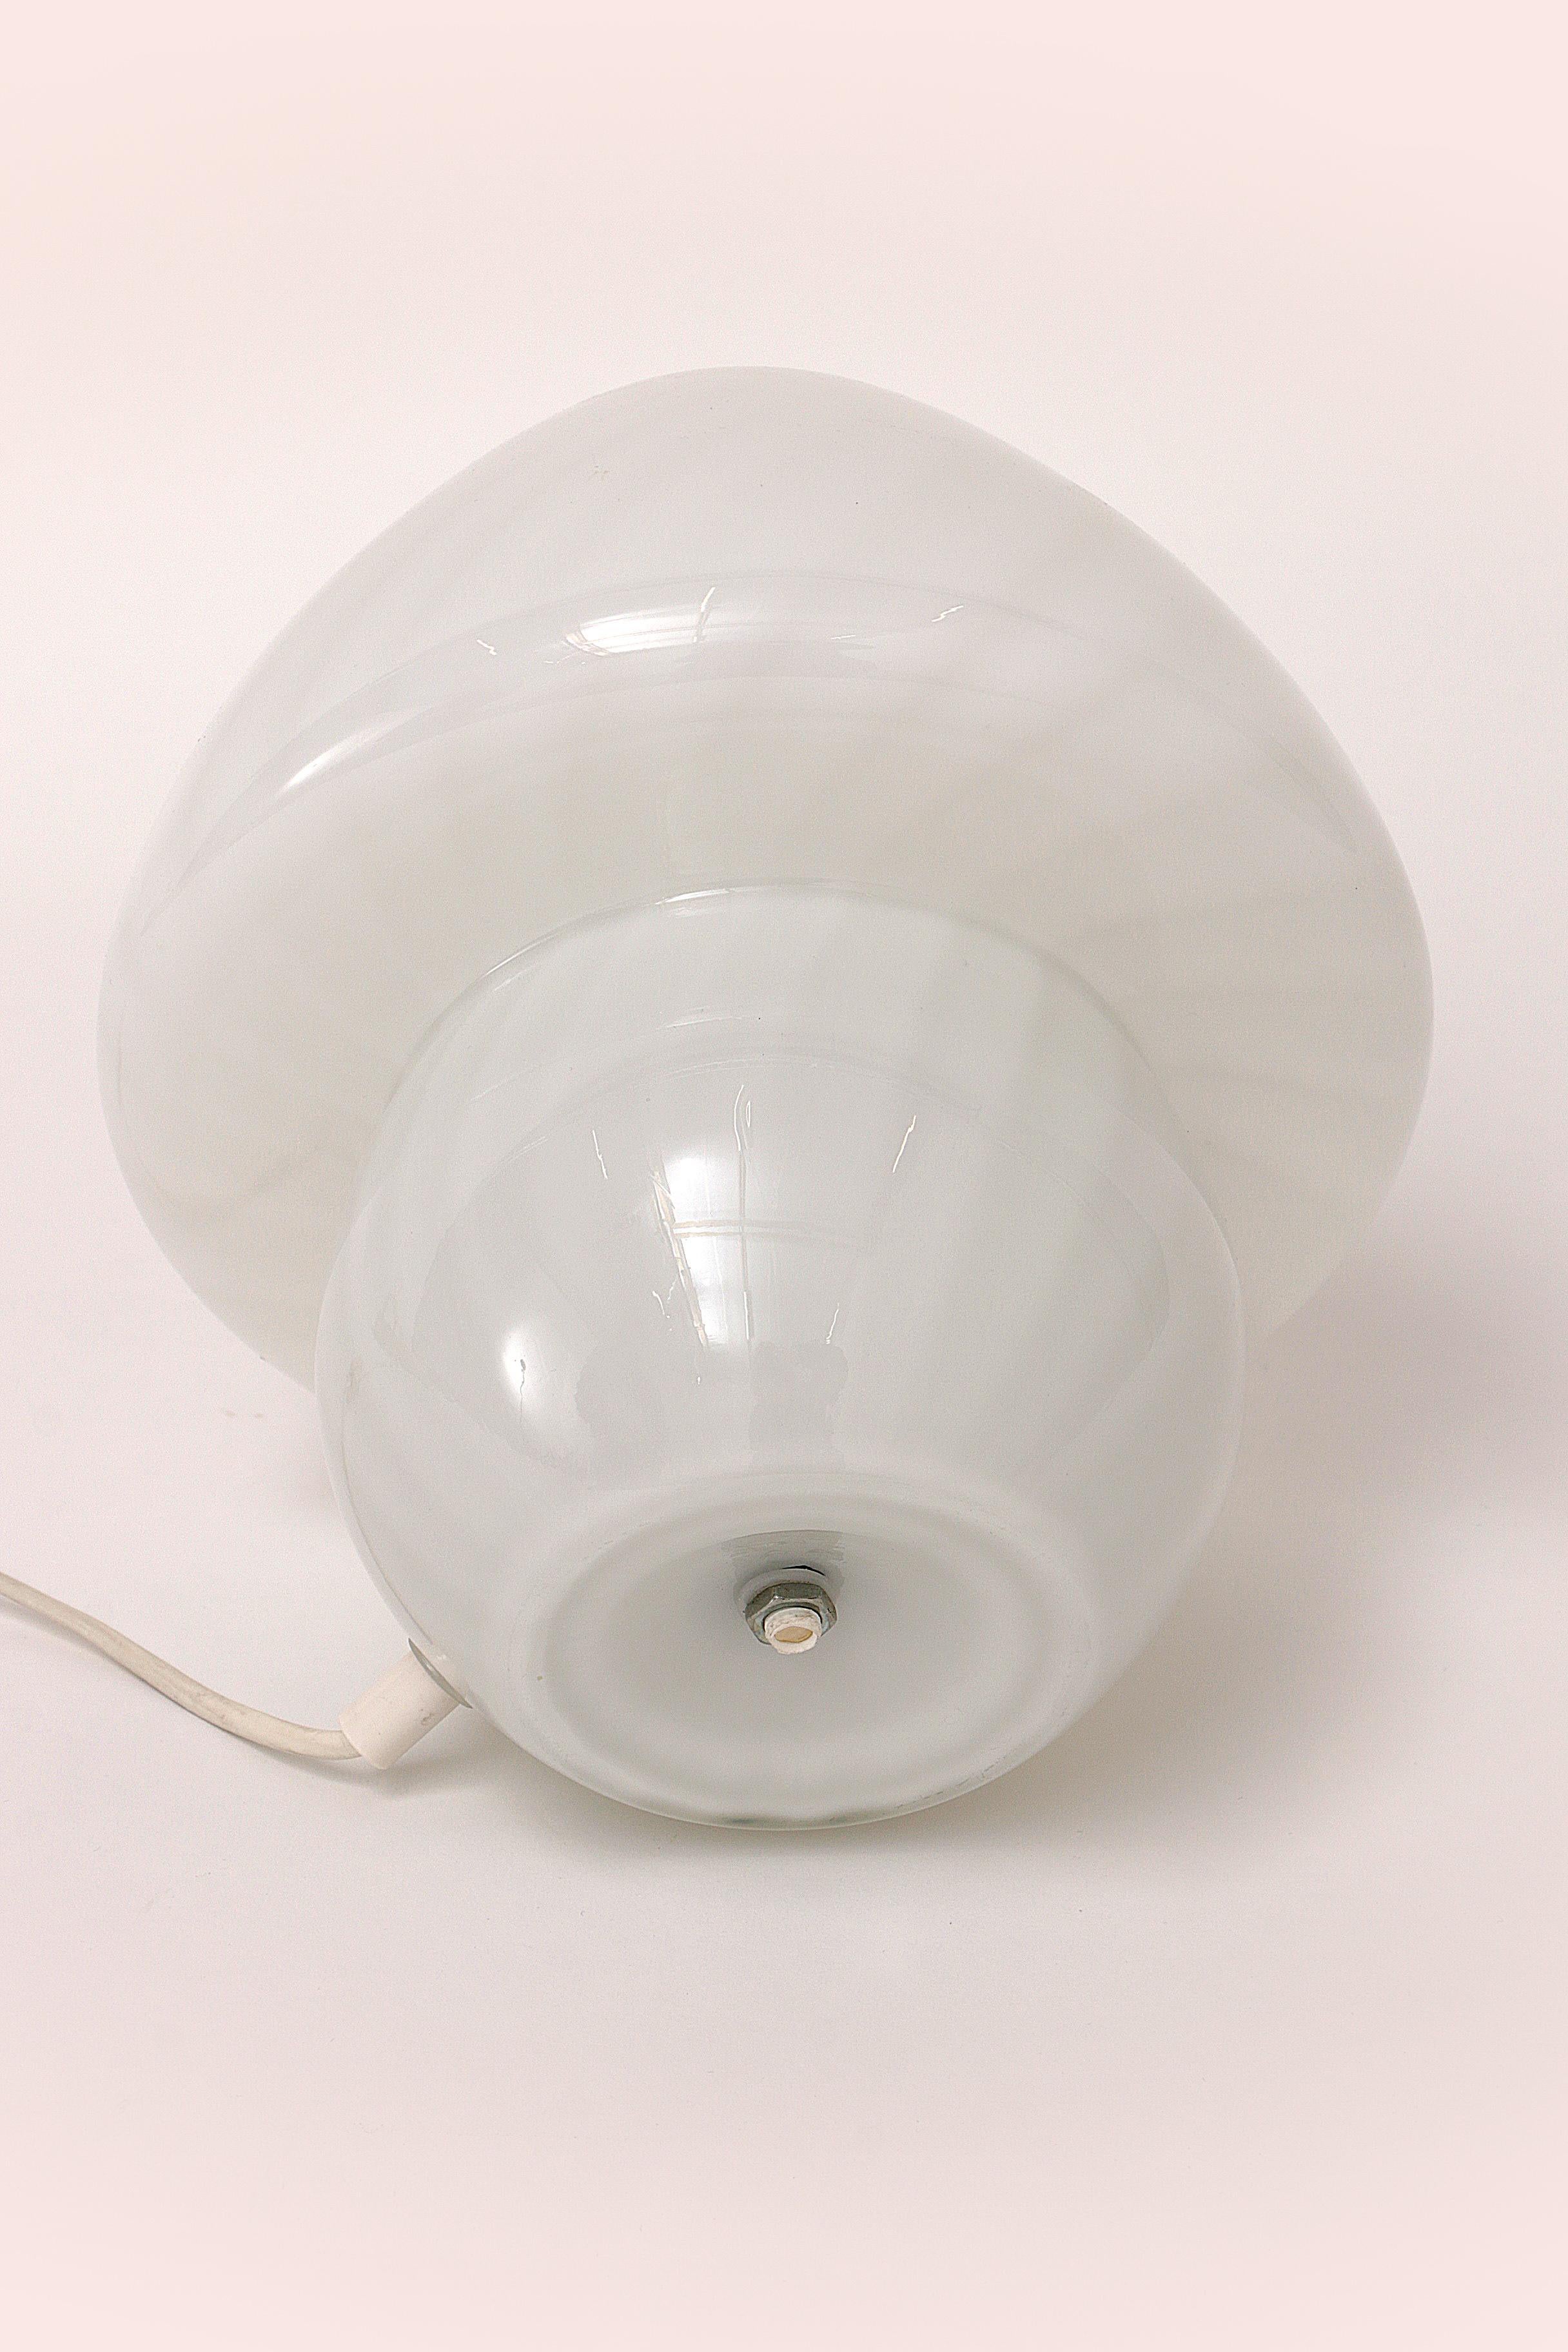 Mid-20th Century Vintage White Mushroom Lamp by Glashutte, 1960 Germany For Sale